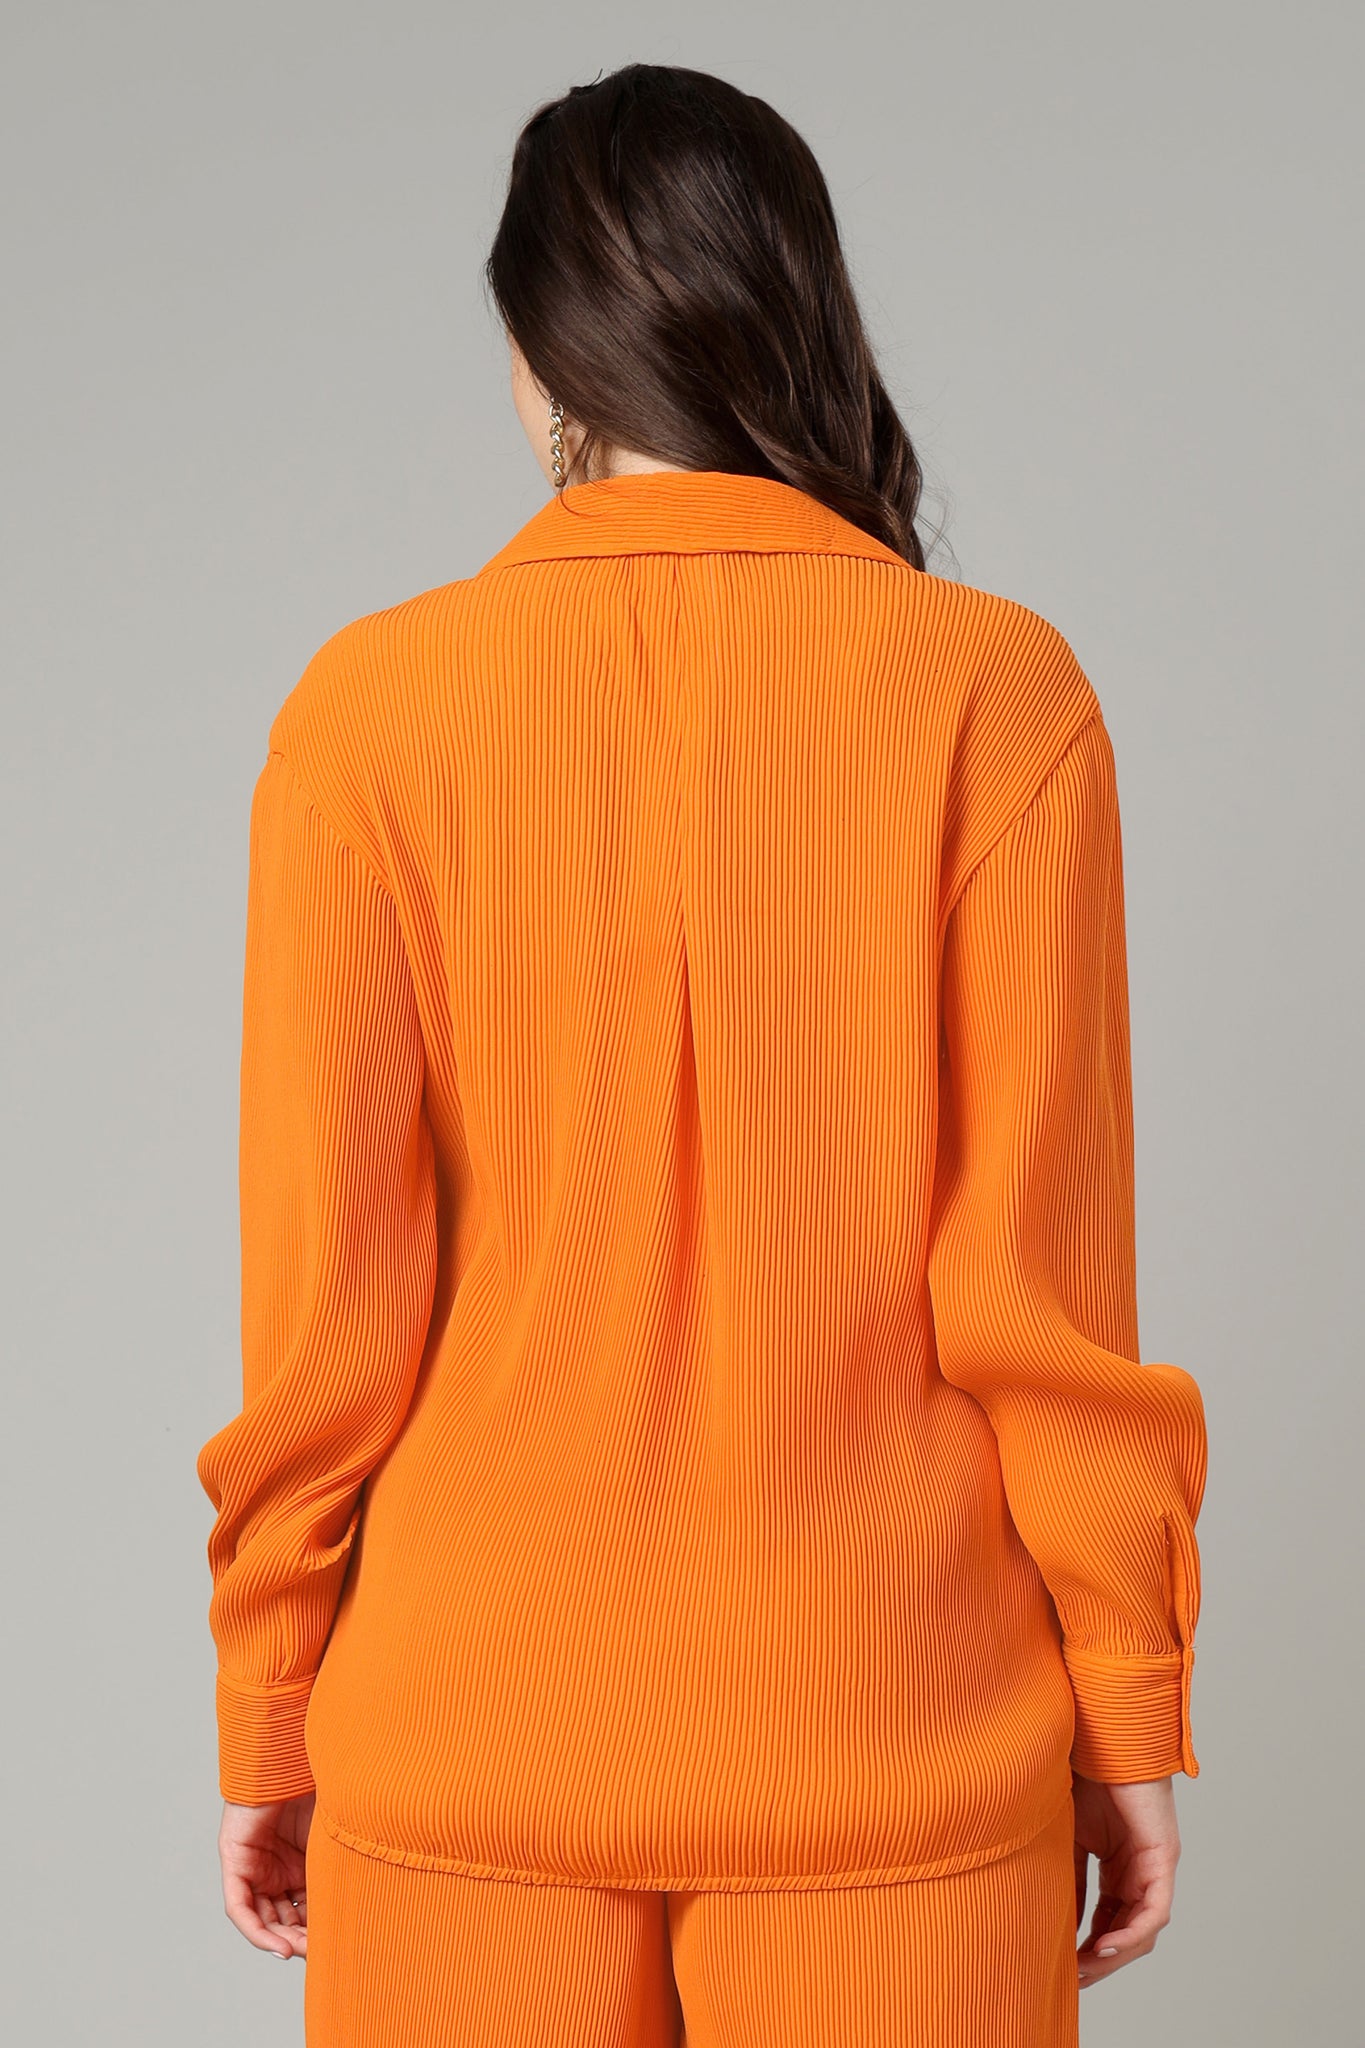 Exclusive Apricot Pleated Shirt For Women